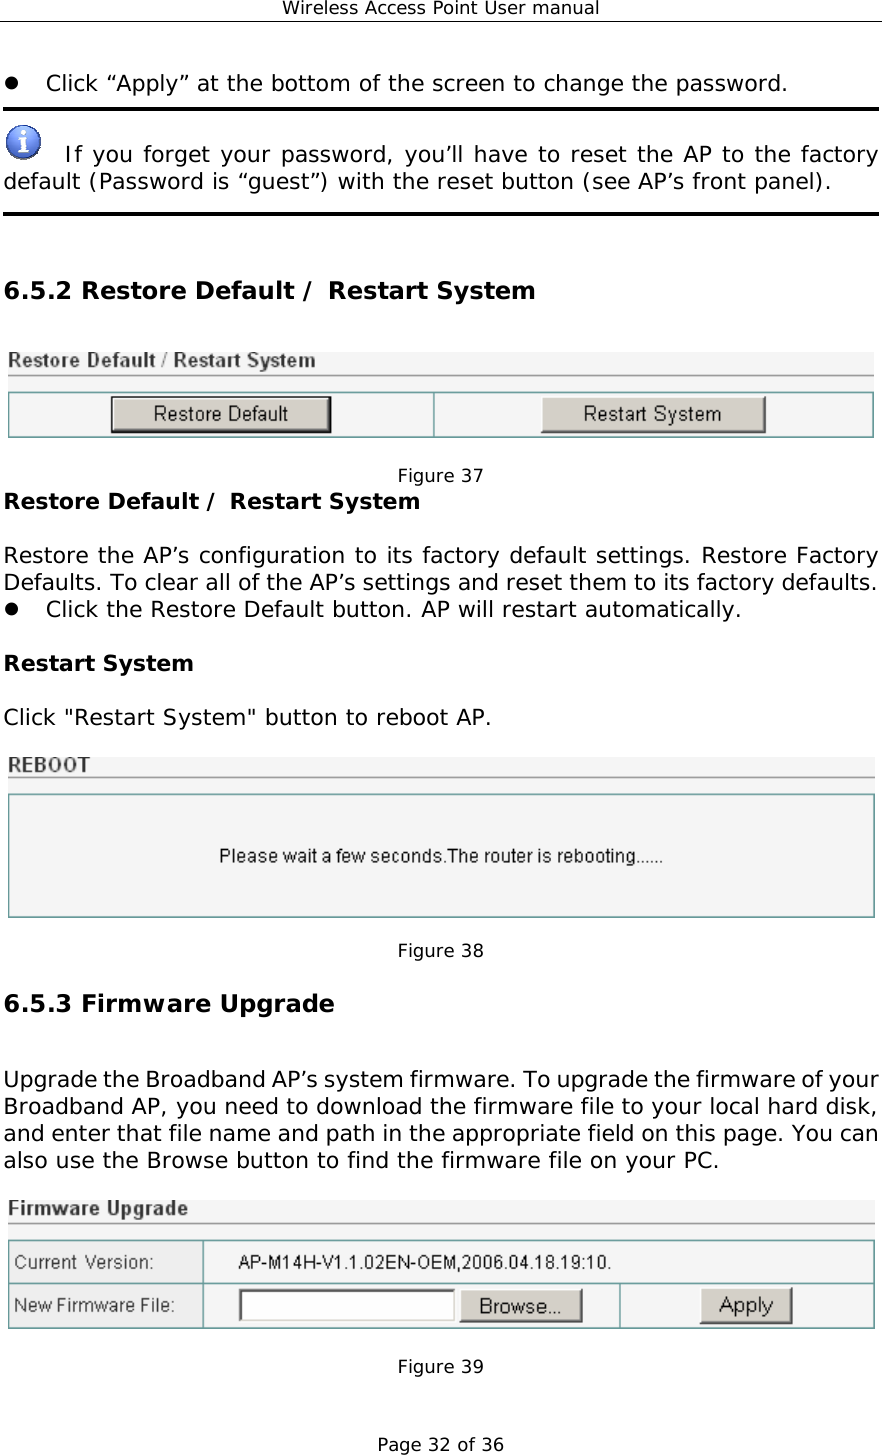 Wireless Access Point User manual Page 32 of 36 z Click “Apply” at the bottom of the screen to change the password.    If you forget your password, you’ll have to reset the AP to the factory default (Password is “guest”) with the reset button (see AP’s front panel).    6.5.2 Restore Default / Restart System   Figure 37 Restore Default / Restart System  Restore the AP’s configuration to its factory default settings. Restore Factory Defaults. To clear all of the AP’s settings and reset them to its factory defaults.  z Click the Restore Default button. AP will restart automatically.   Restart System  Click &quot;Restart System&quot; button to reboot AP.    Figure 38 6.5.3 Firmware Upgrade Upgrade the Broadband AP’s system firmware. To upgrade the firmware of your Broadband AP, you need to download the firmware file to your local hard disk, and enter that file name and path in the appropriate field on this page. You can also use the Browse button to find the firmware file on your PC.    Figure 39 